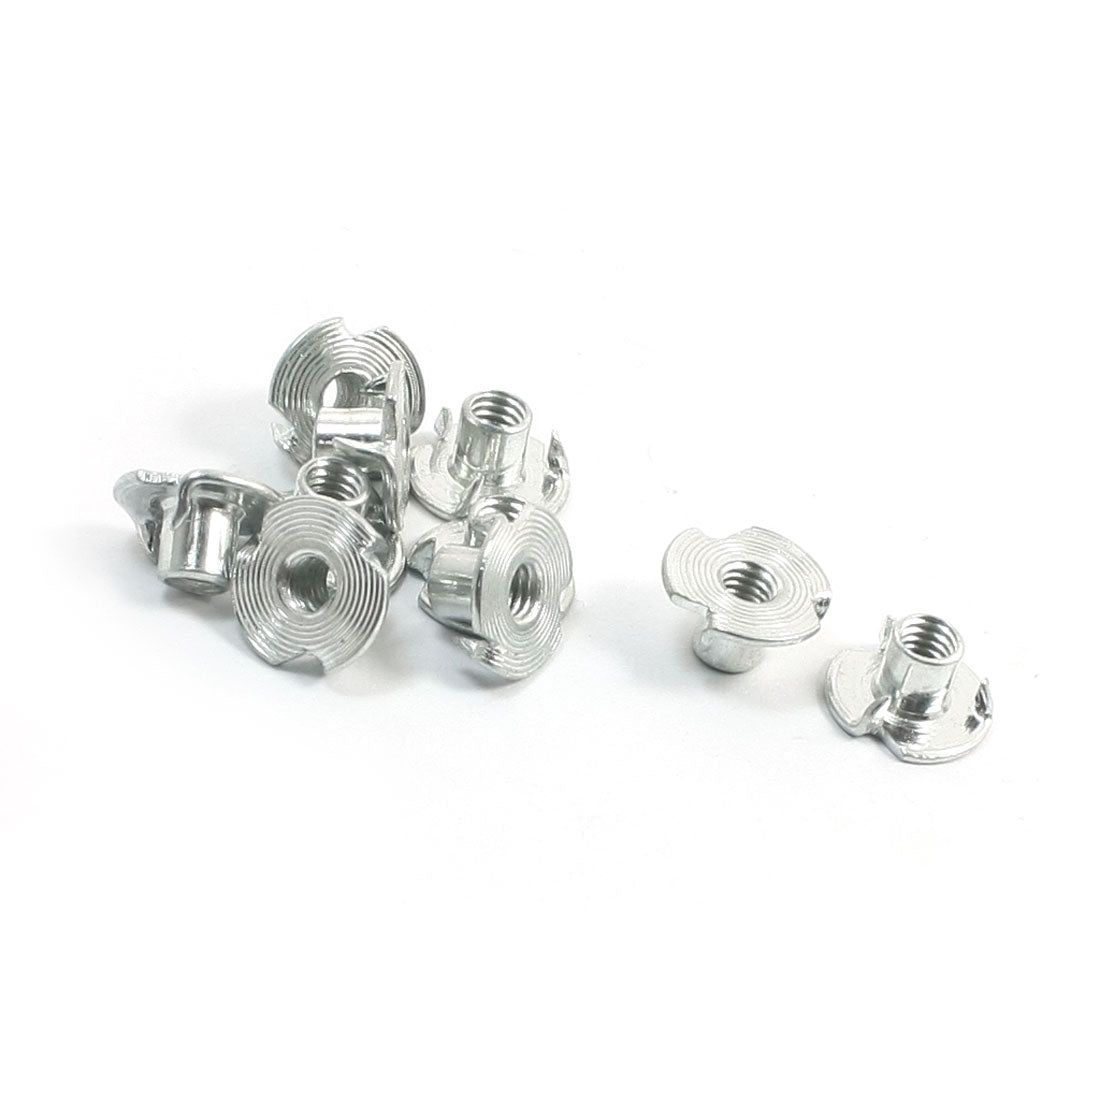 uxcell Uxcell 10PCS Silver Tone Metal Tee Nuts Claw Nut M4 x 11mm x 6mm